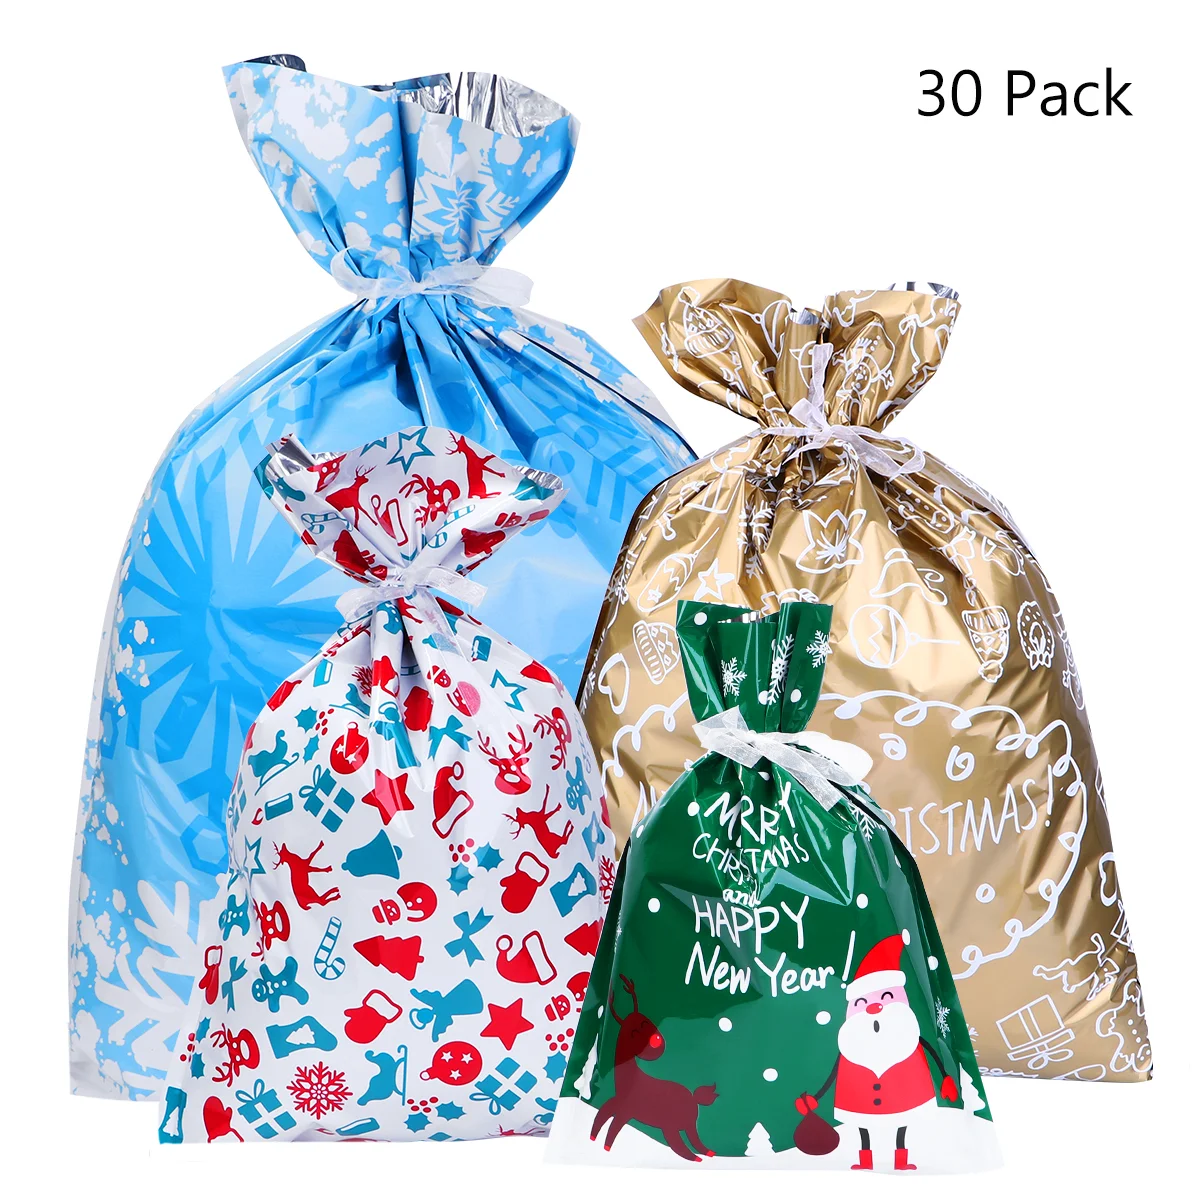 

Aluminum Foil Christmas Candy Bags Christmas Gift Doll Bags Holiday Xmas Gift Drawstring Bags Party Treat Bags